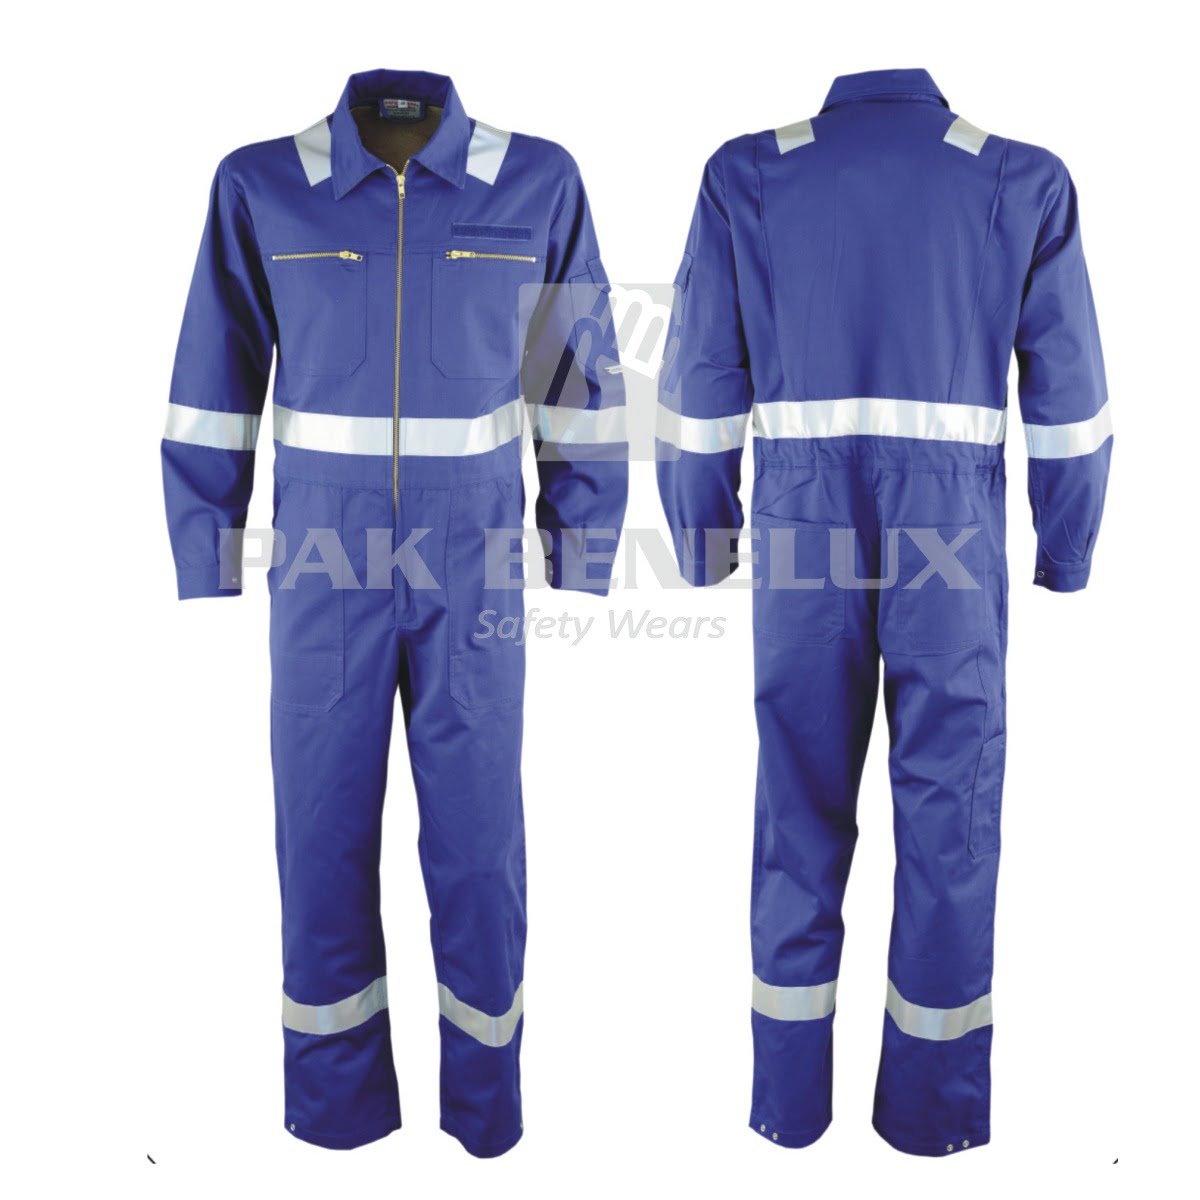 Coverall Pak Benelux BSCI OEM Gloves Manufacturer in Sialkot Pakistan